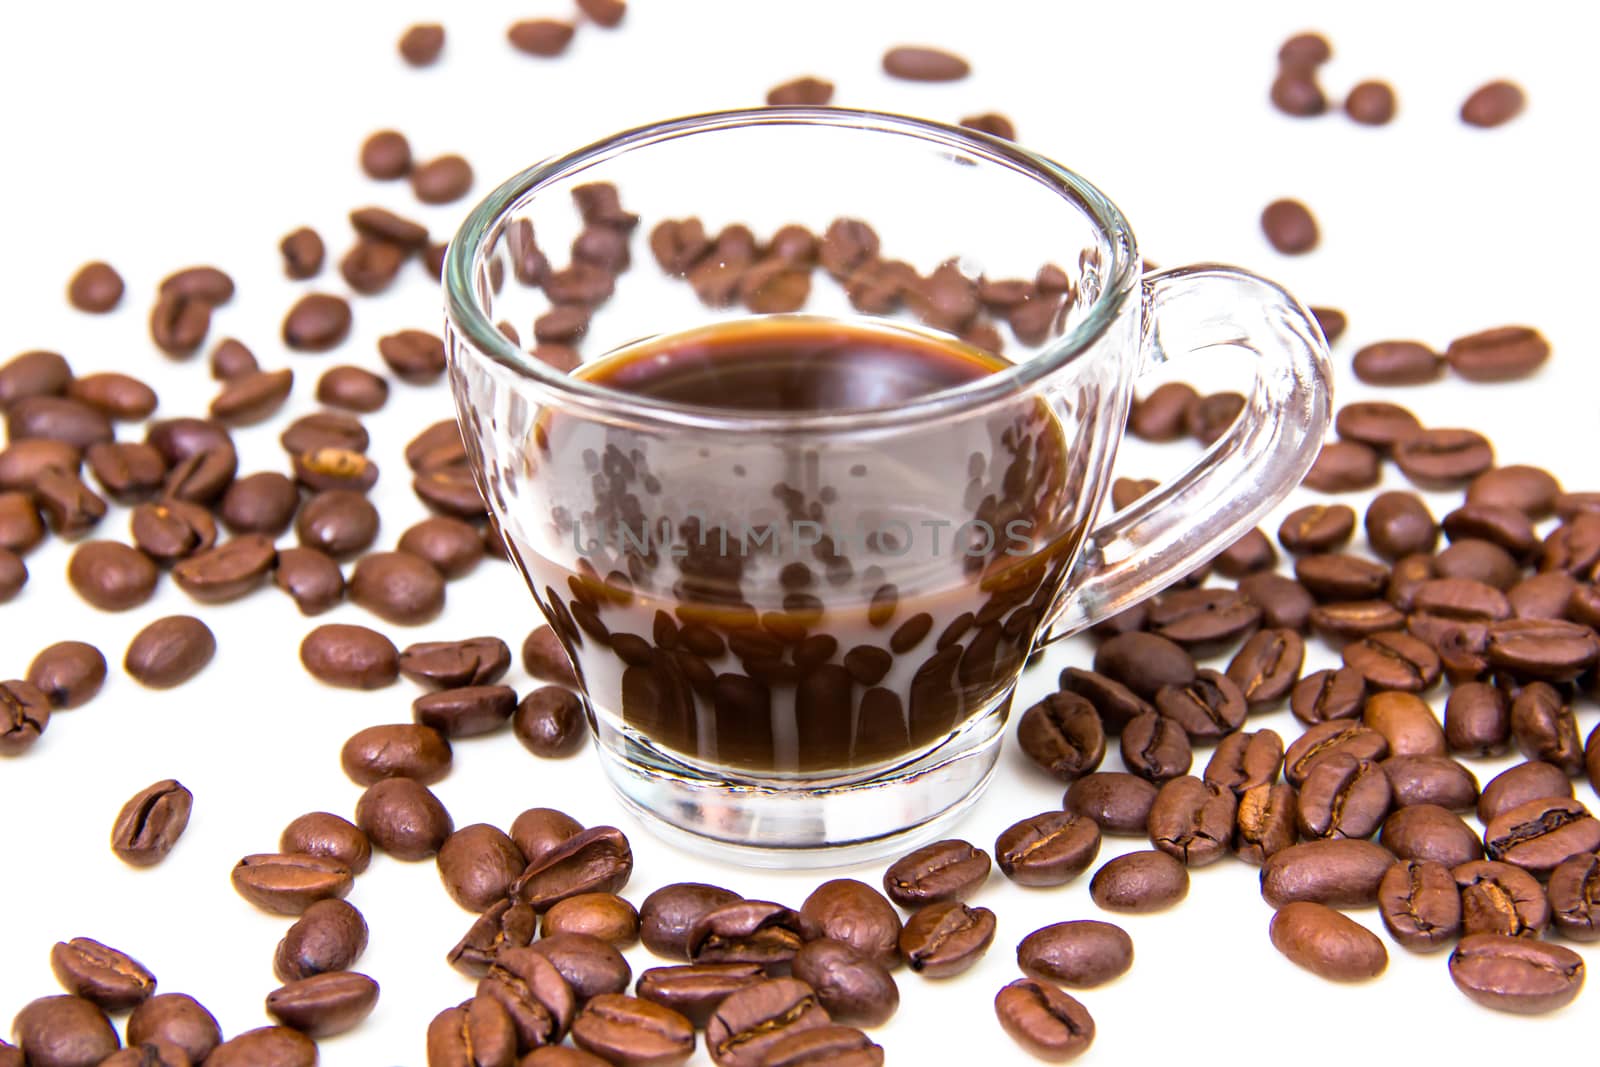 Cup of coffee and coffee beans on white background close up view